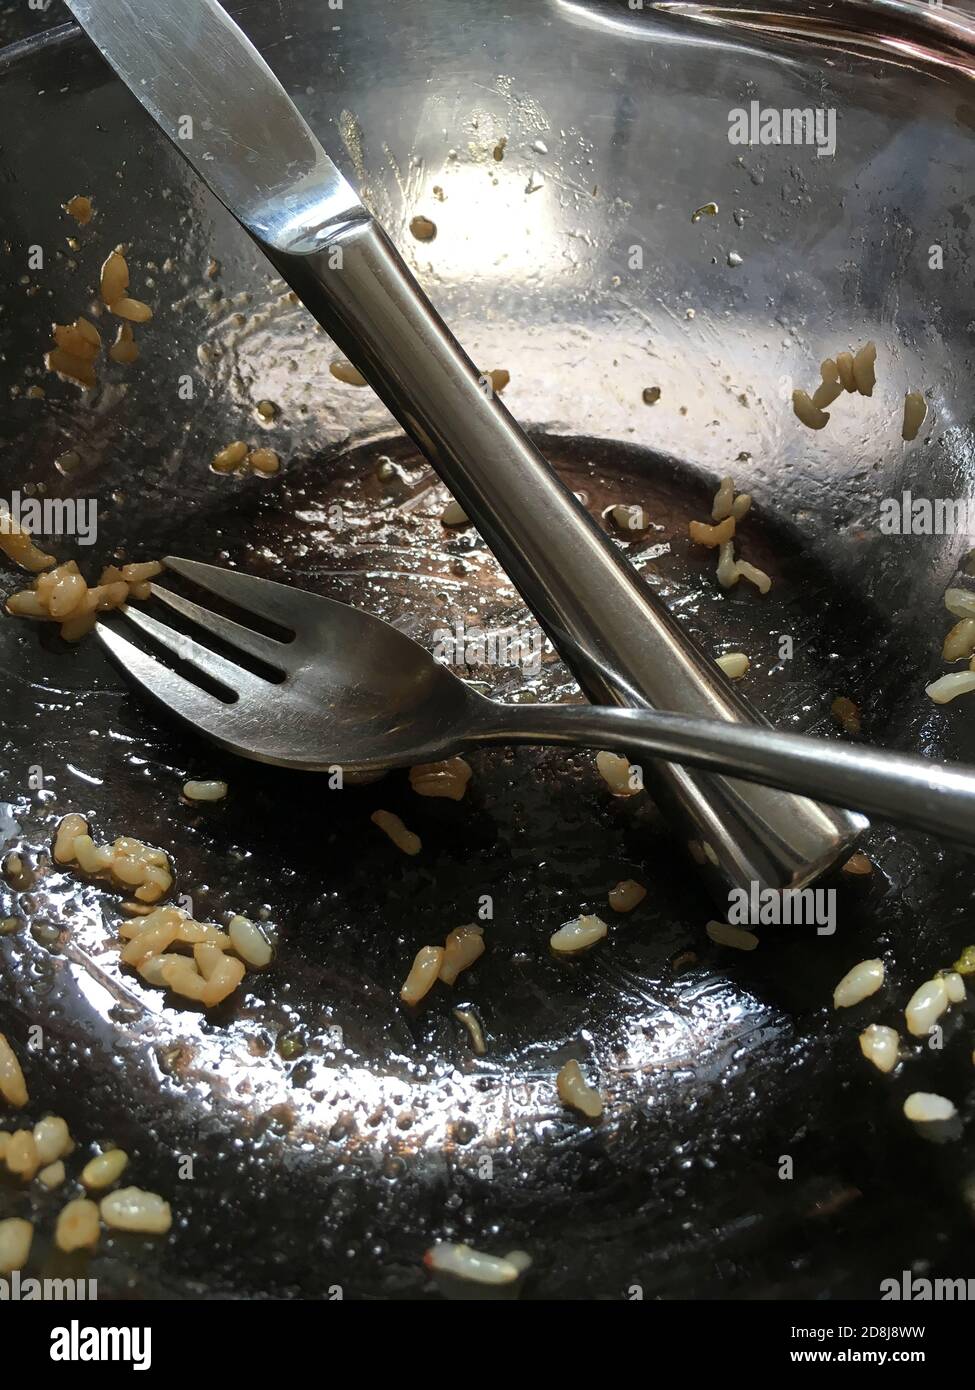 Glass Bowl with eating Utensils Stock Photo